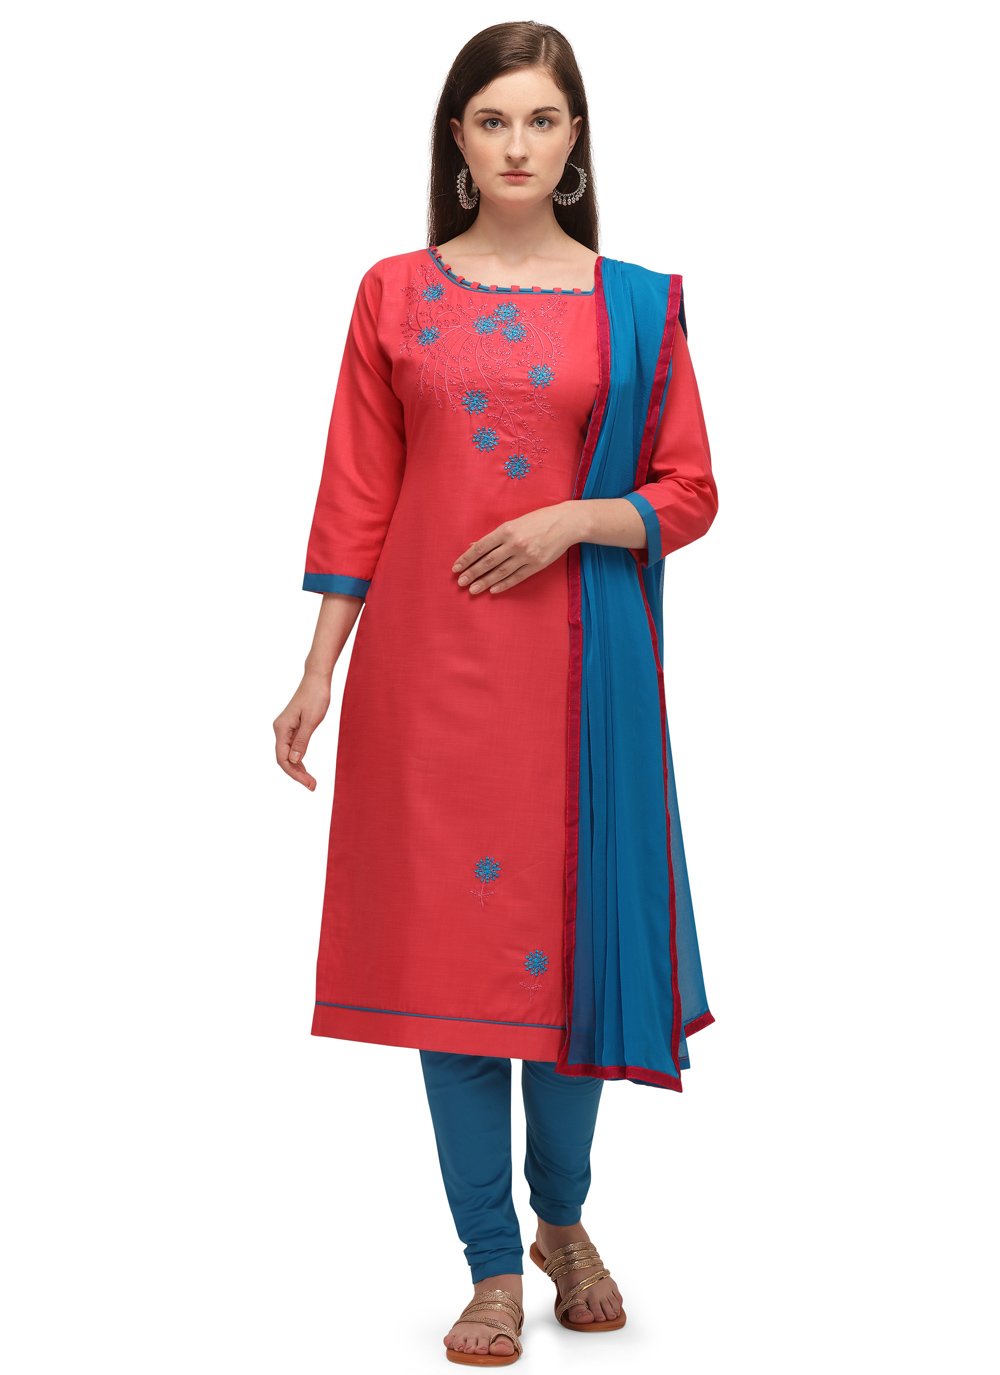 Embroidered Cotton Churidar Designer Suit in Red